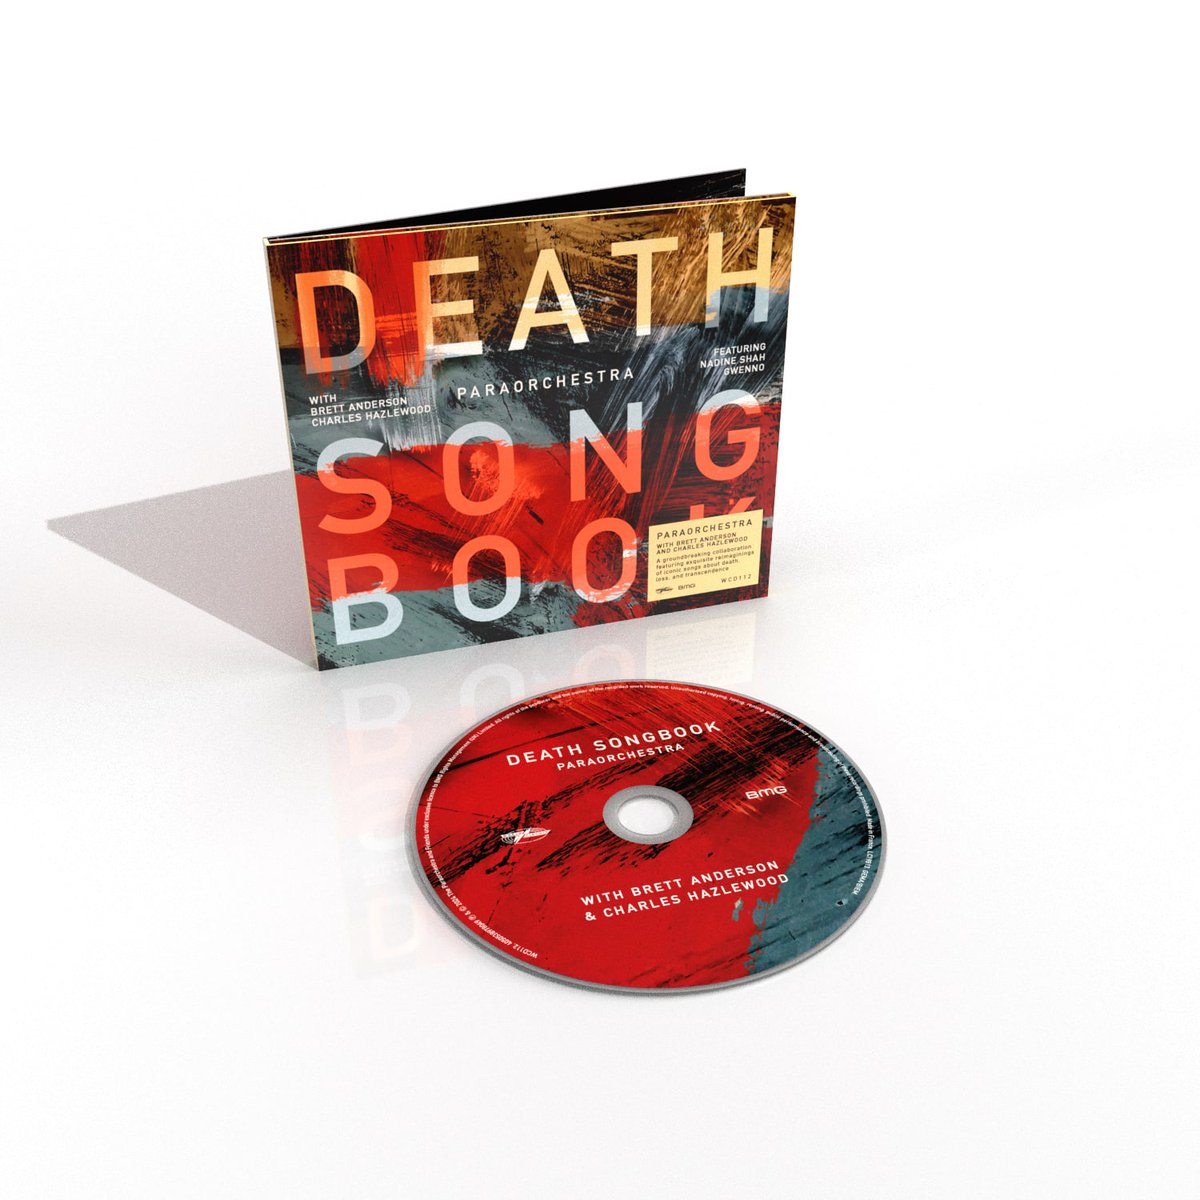 Here's a closer look at the vinyl and CD formats of 'Death Songbook', a new collaboration between Brett Anderson, @CharlieHazlewoo and @Paraorchestra, out April 19th. Pre-order the album here: paraorchestra.lnk.to/deathsongbookTW - SuedeHQ